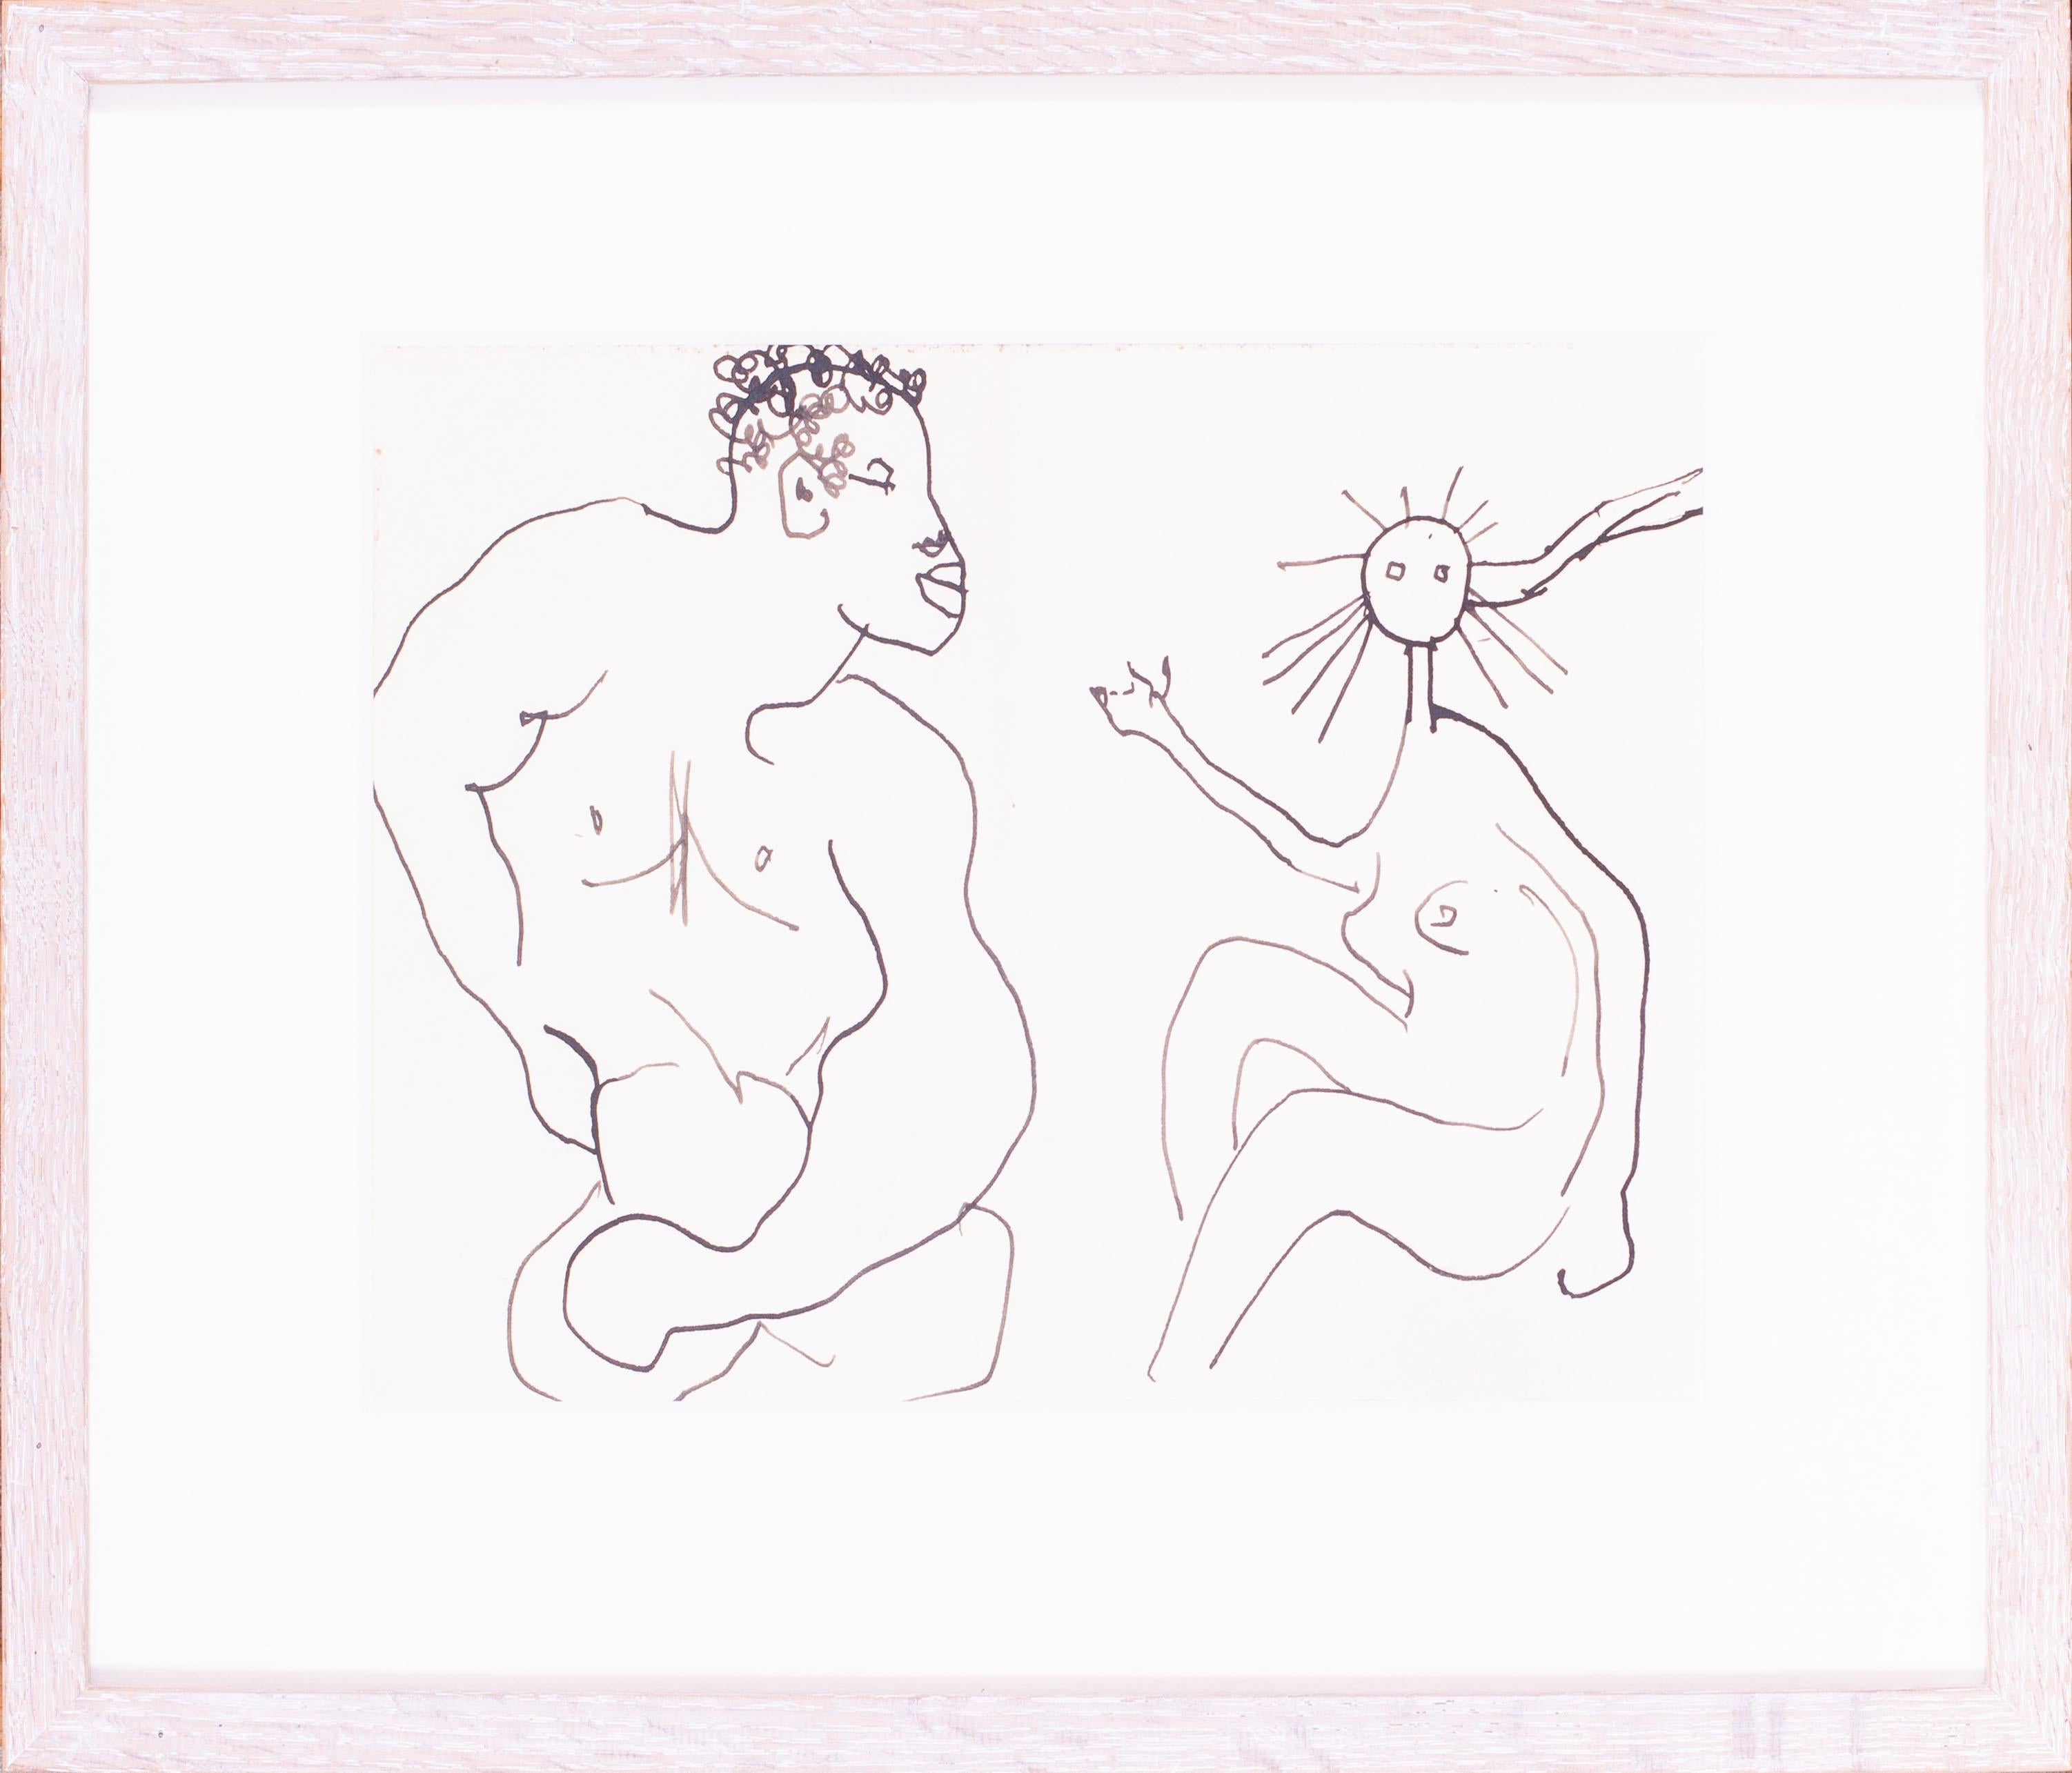 Eye catching Roger Hilton drawing of a Man and Woman, ink on paper, modern brit